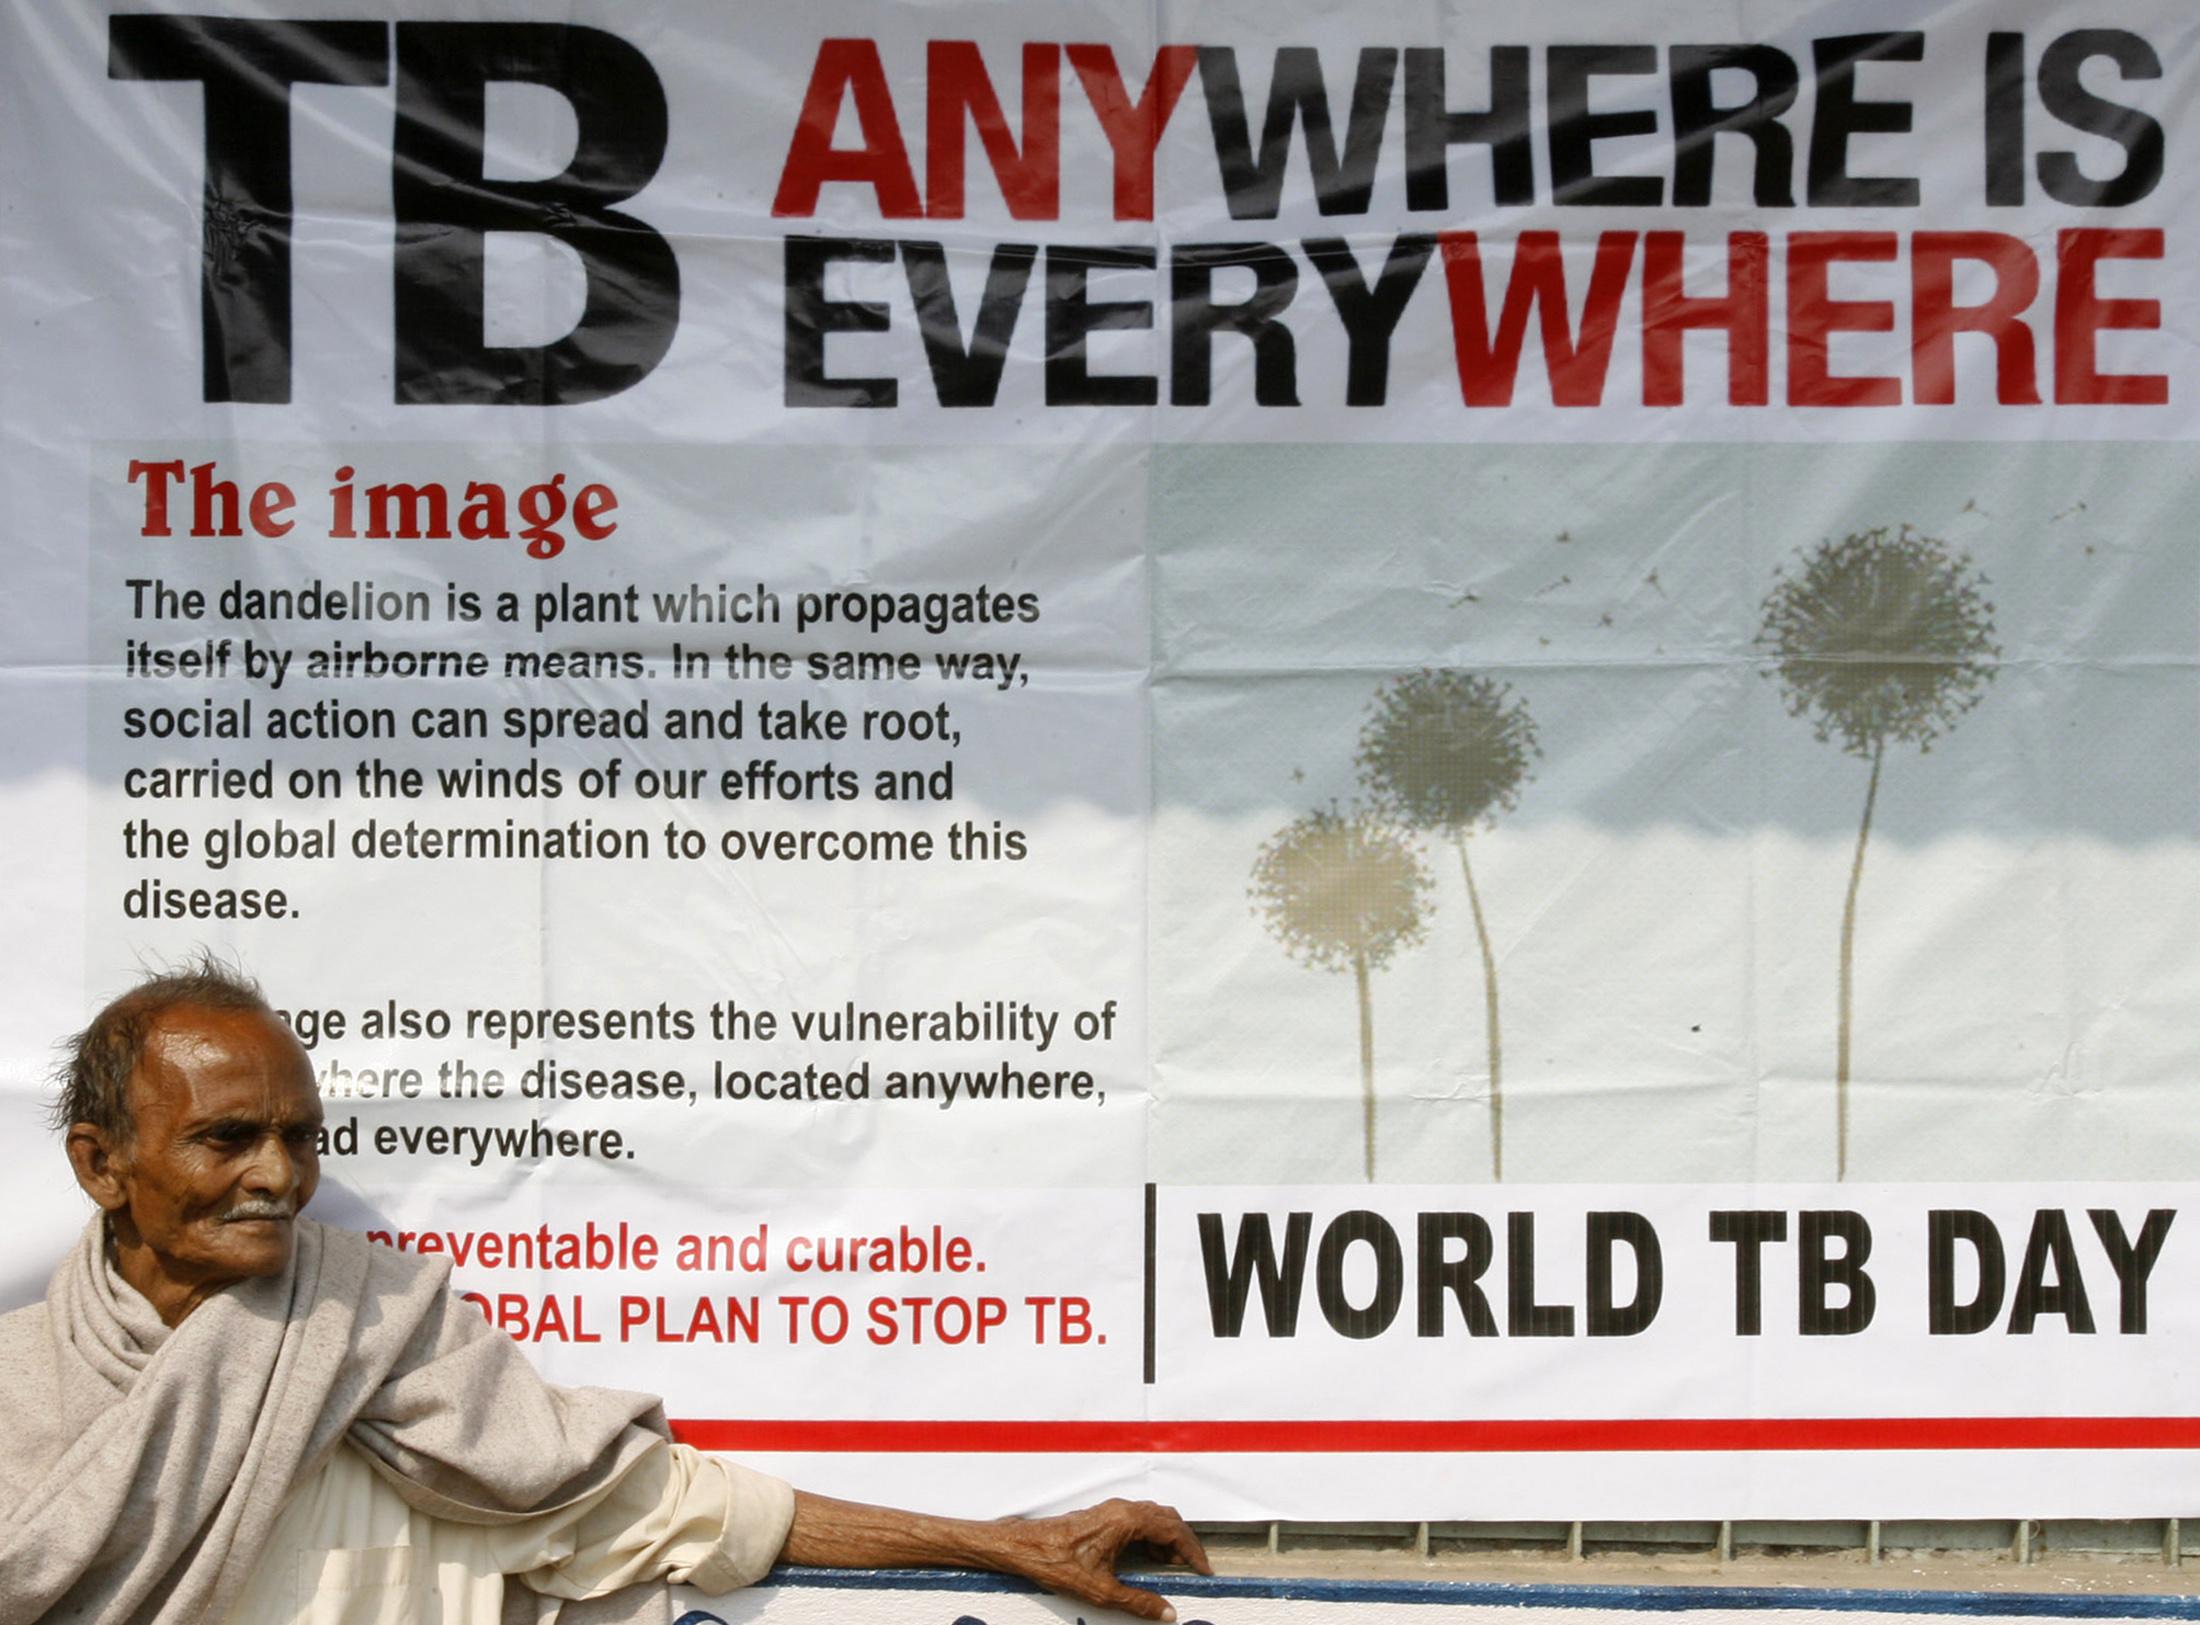 Man living with TB waits for treatment outside a medical center in Siliguri, India, on March 24, 2009.